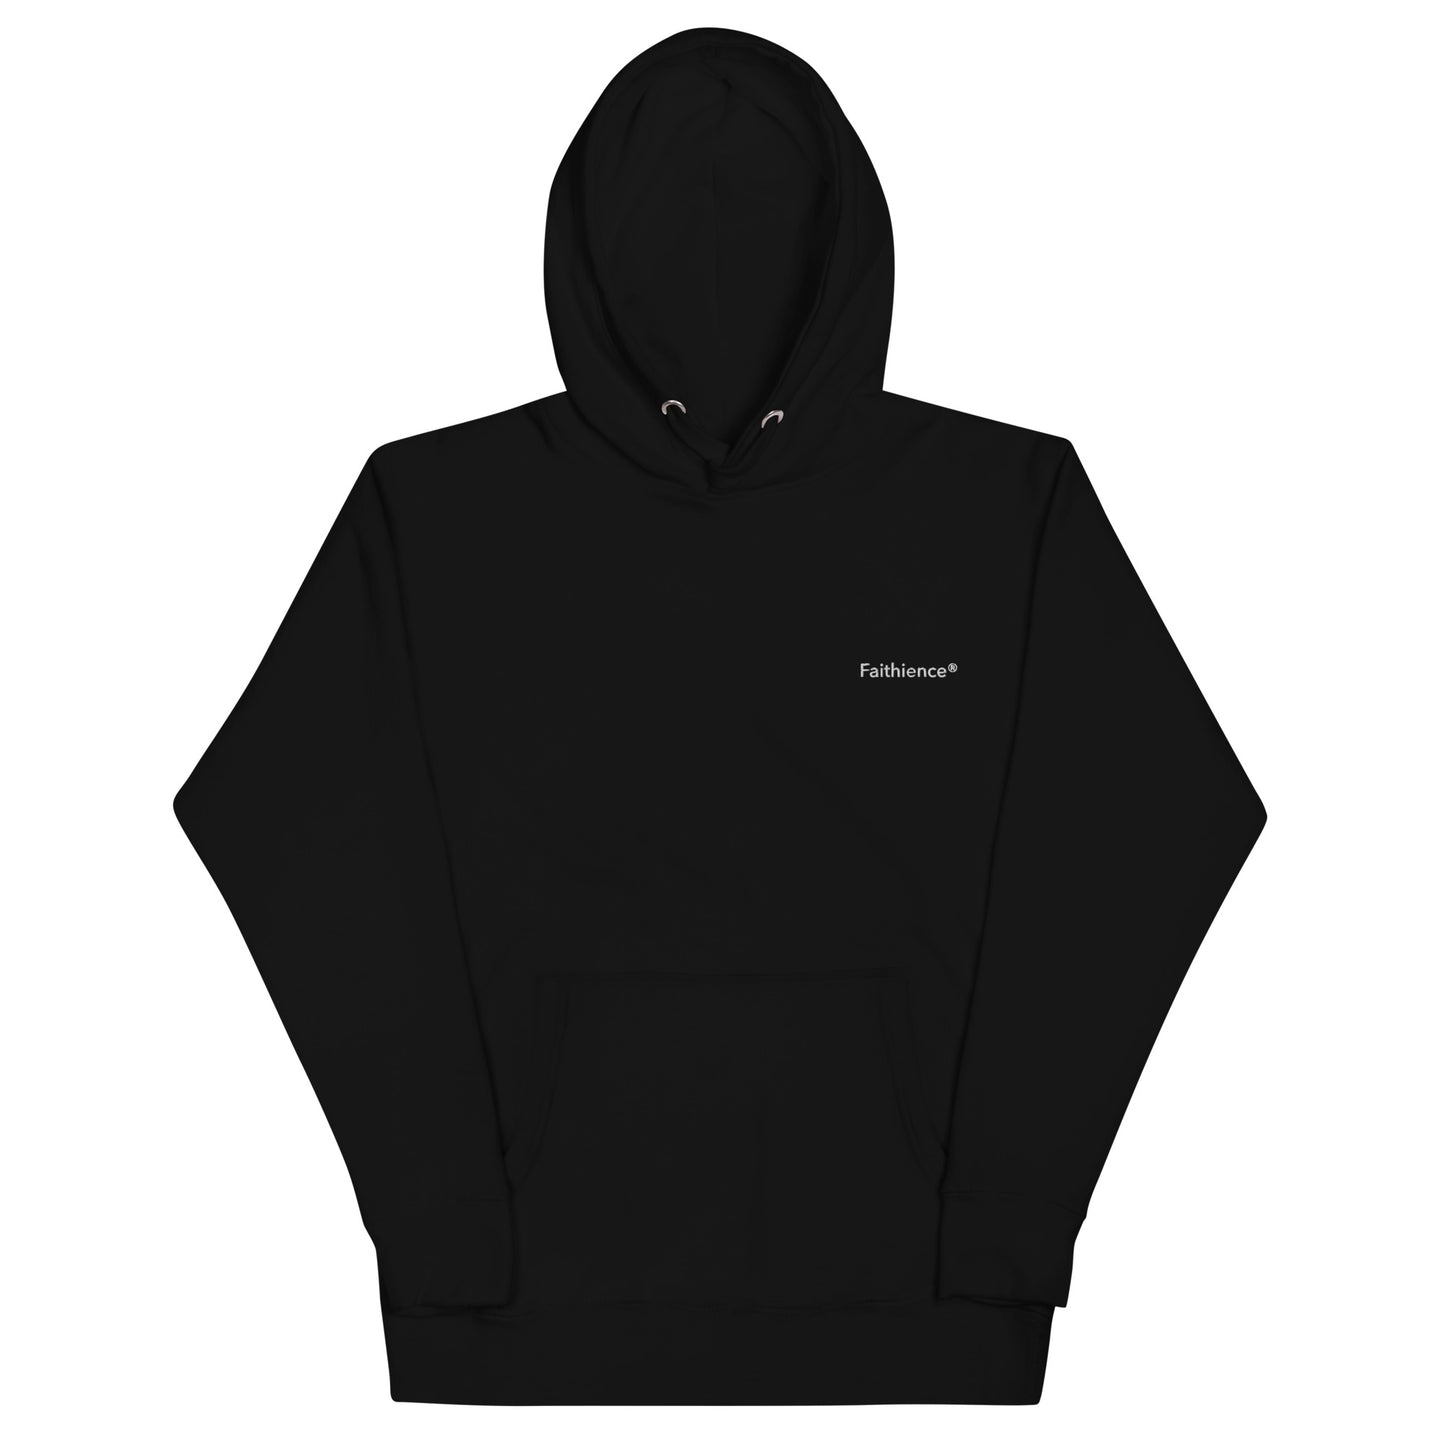 Embroidered Hoodies